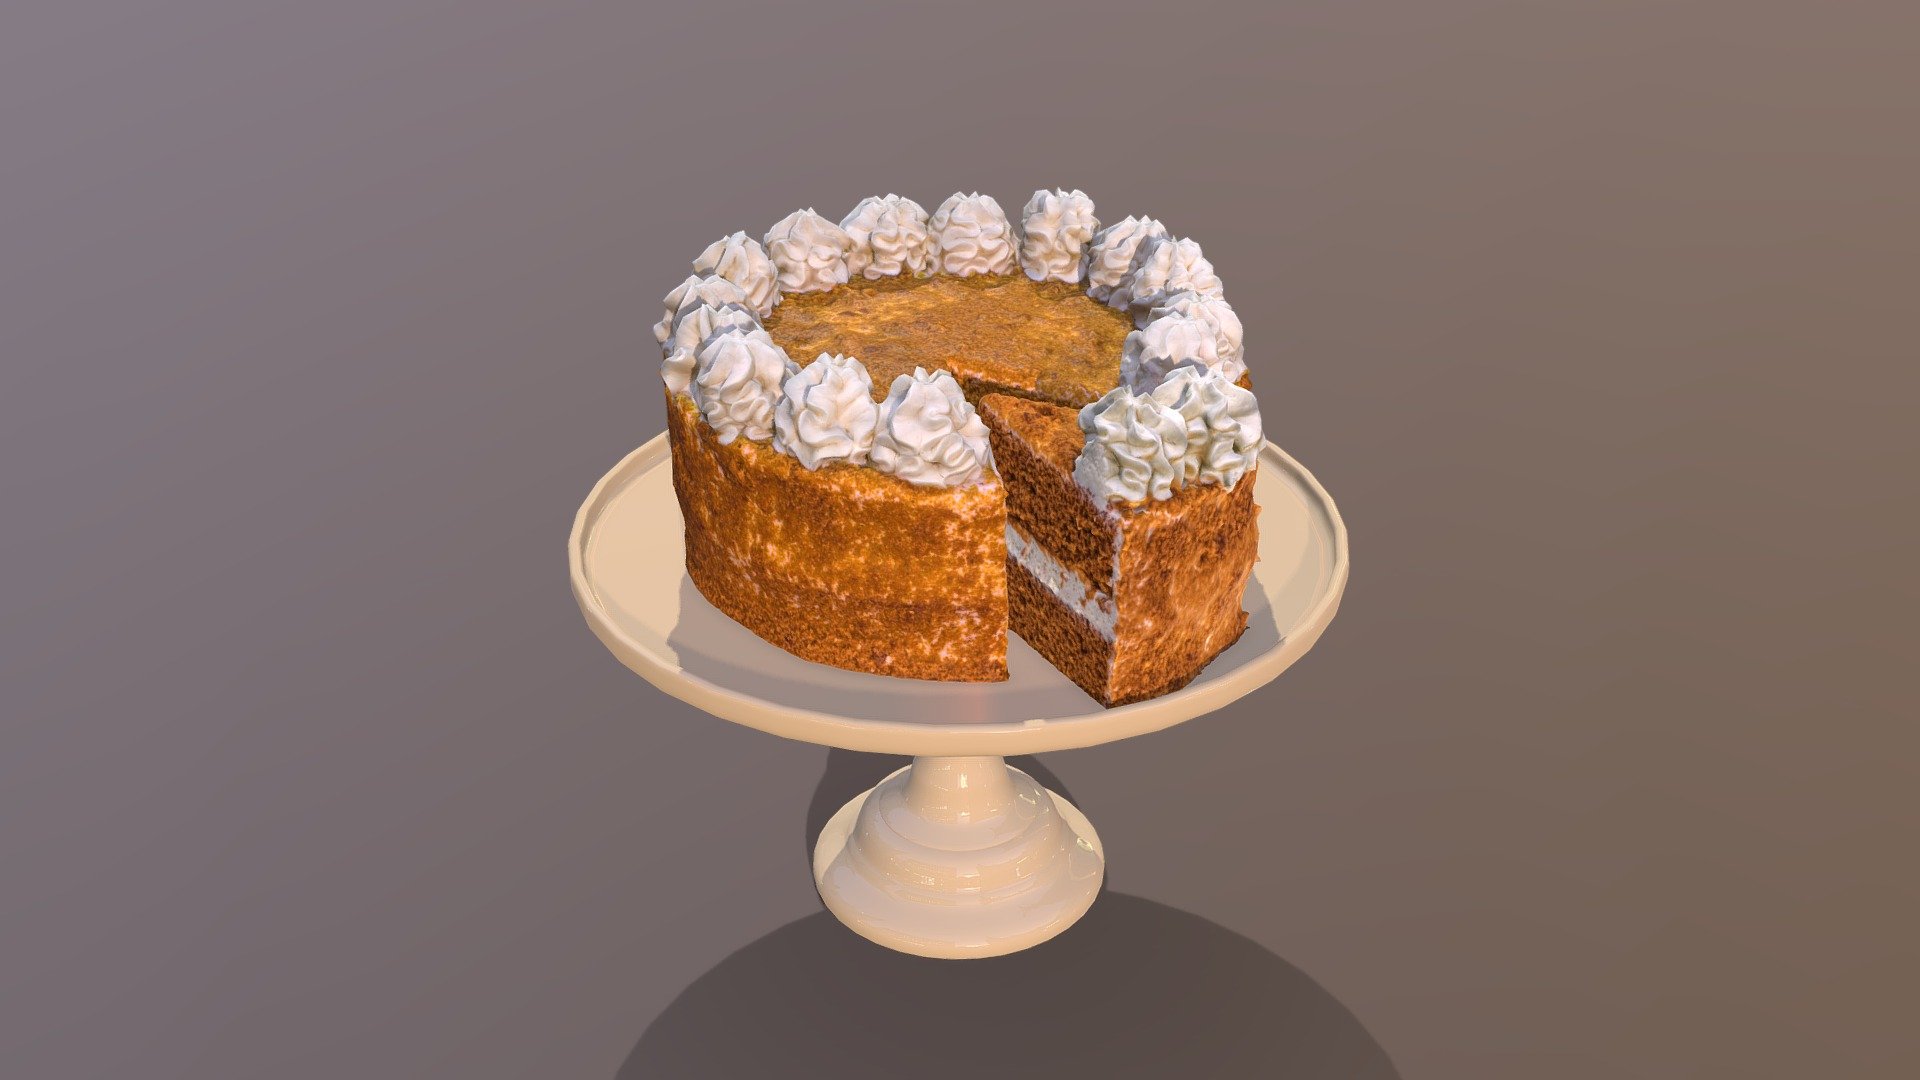 This premium Caramel Cake model was created using photogrammetry which is made by CAKESBURG Premium Cake Shop in the UK. You can purchase real cake from this link: https://cakesburg.co.uk/products/red-velvet-buttercream-cake?_pos=2&amp;_sid=a9ff9af21&amp;_ss=r

Cut Cake Textures 4096*4096px PBR photoscan-based materials (Base Color, Normal, Roughness, Specular, AO)

Slice Textures 4096*4096px PBR photoscan-based materials (Base Color, Normal, Roughness, Specular, AO)

Click here for the uncut version.

Click here for a slice of cake model 3d model